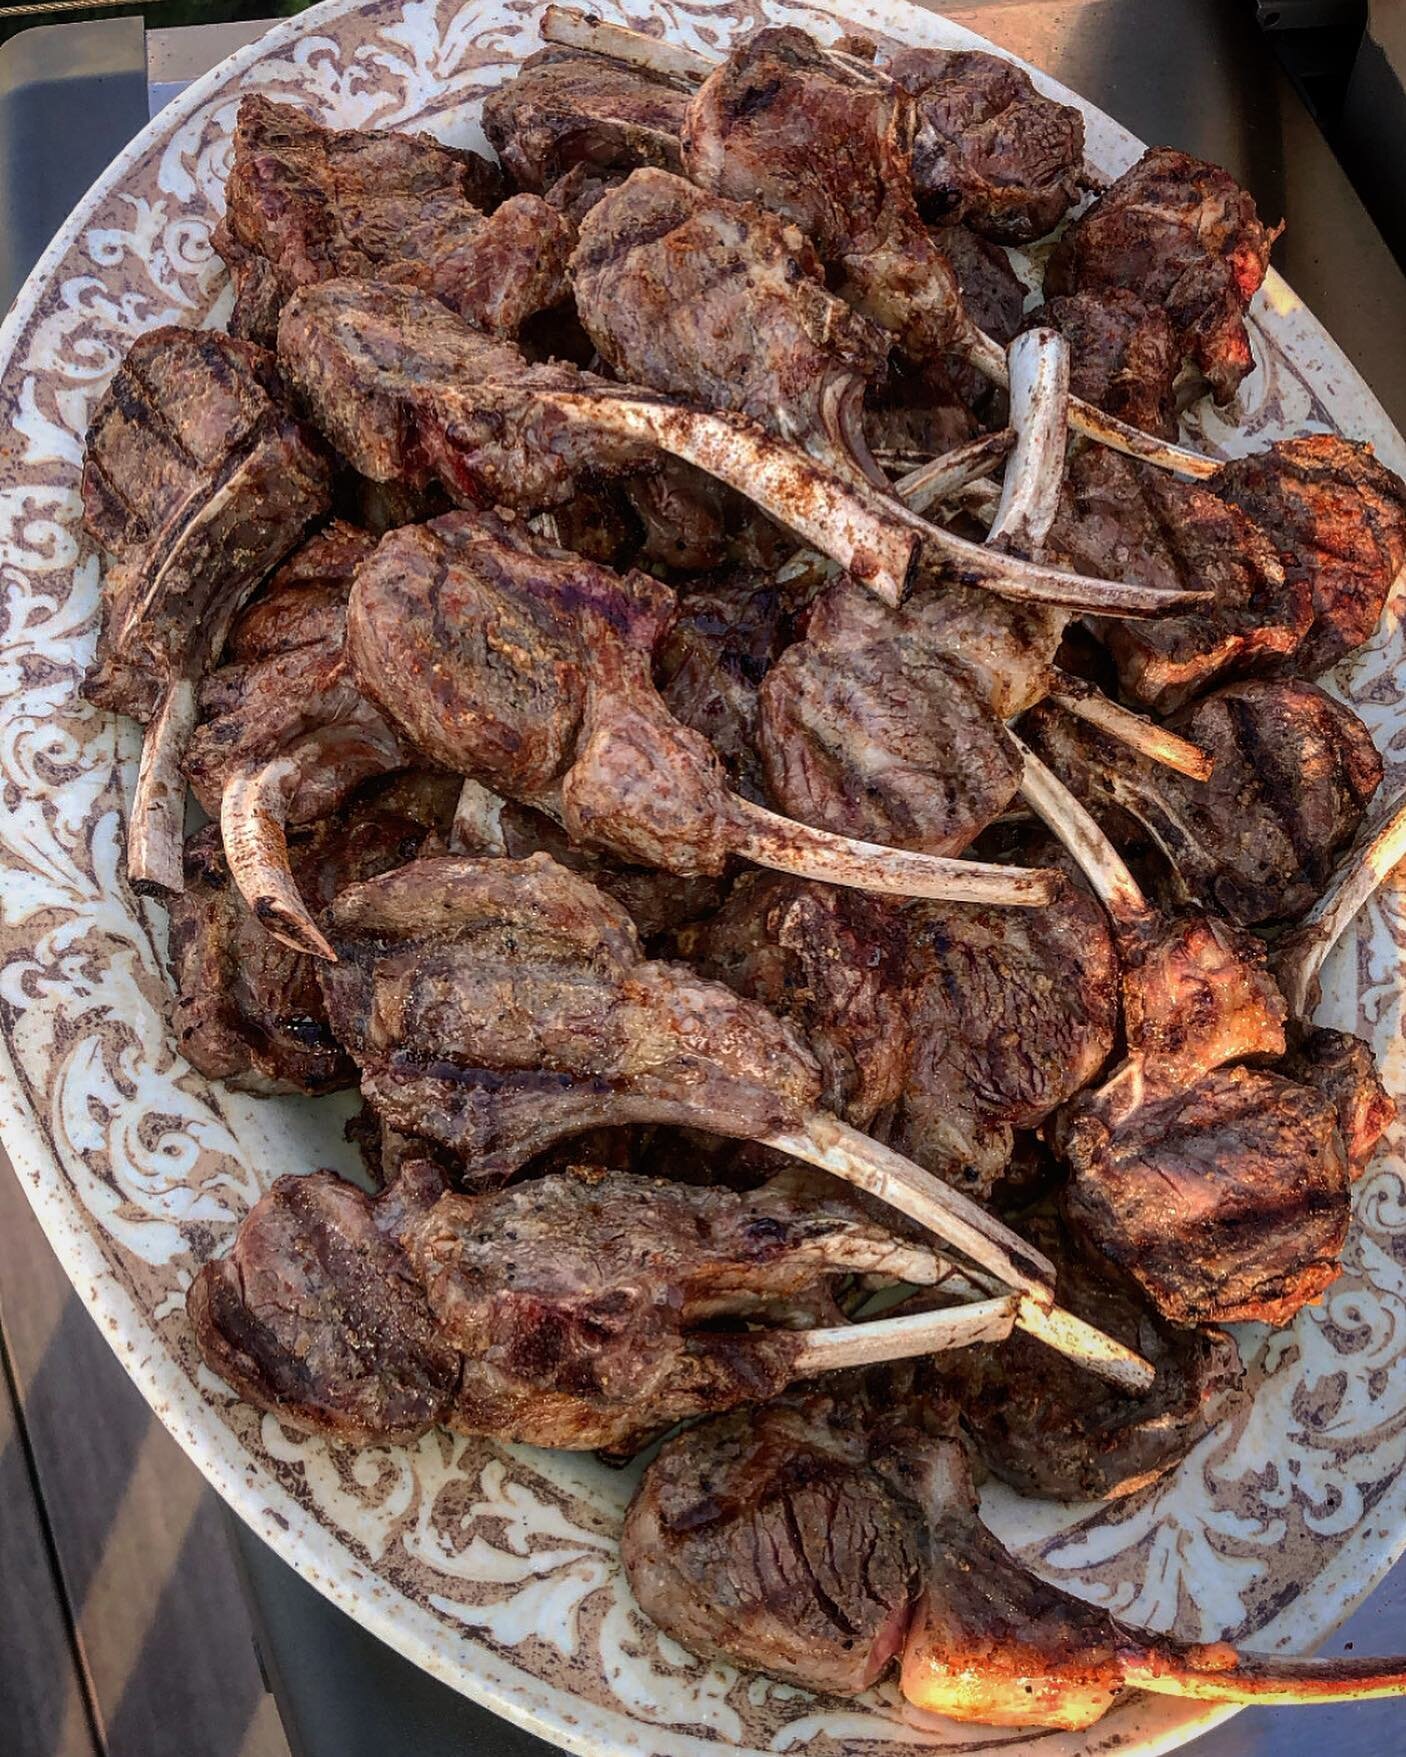 Have you tried our Baby Lamb-chops? You can buy the whole rack, or one of our master butchers can hand cut them for you into pieces. This is a perfect option to change up your normal cooking. These lamb-chops offer a rich juicy flavor and will become